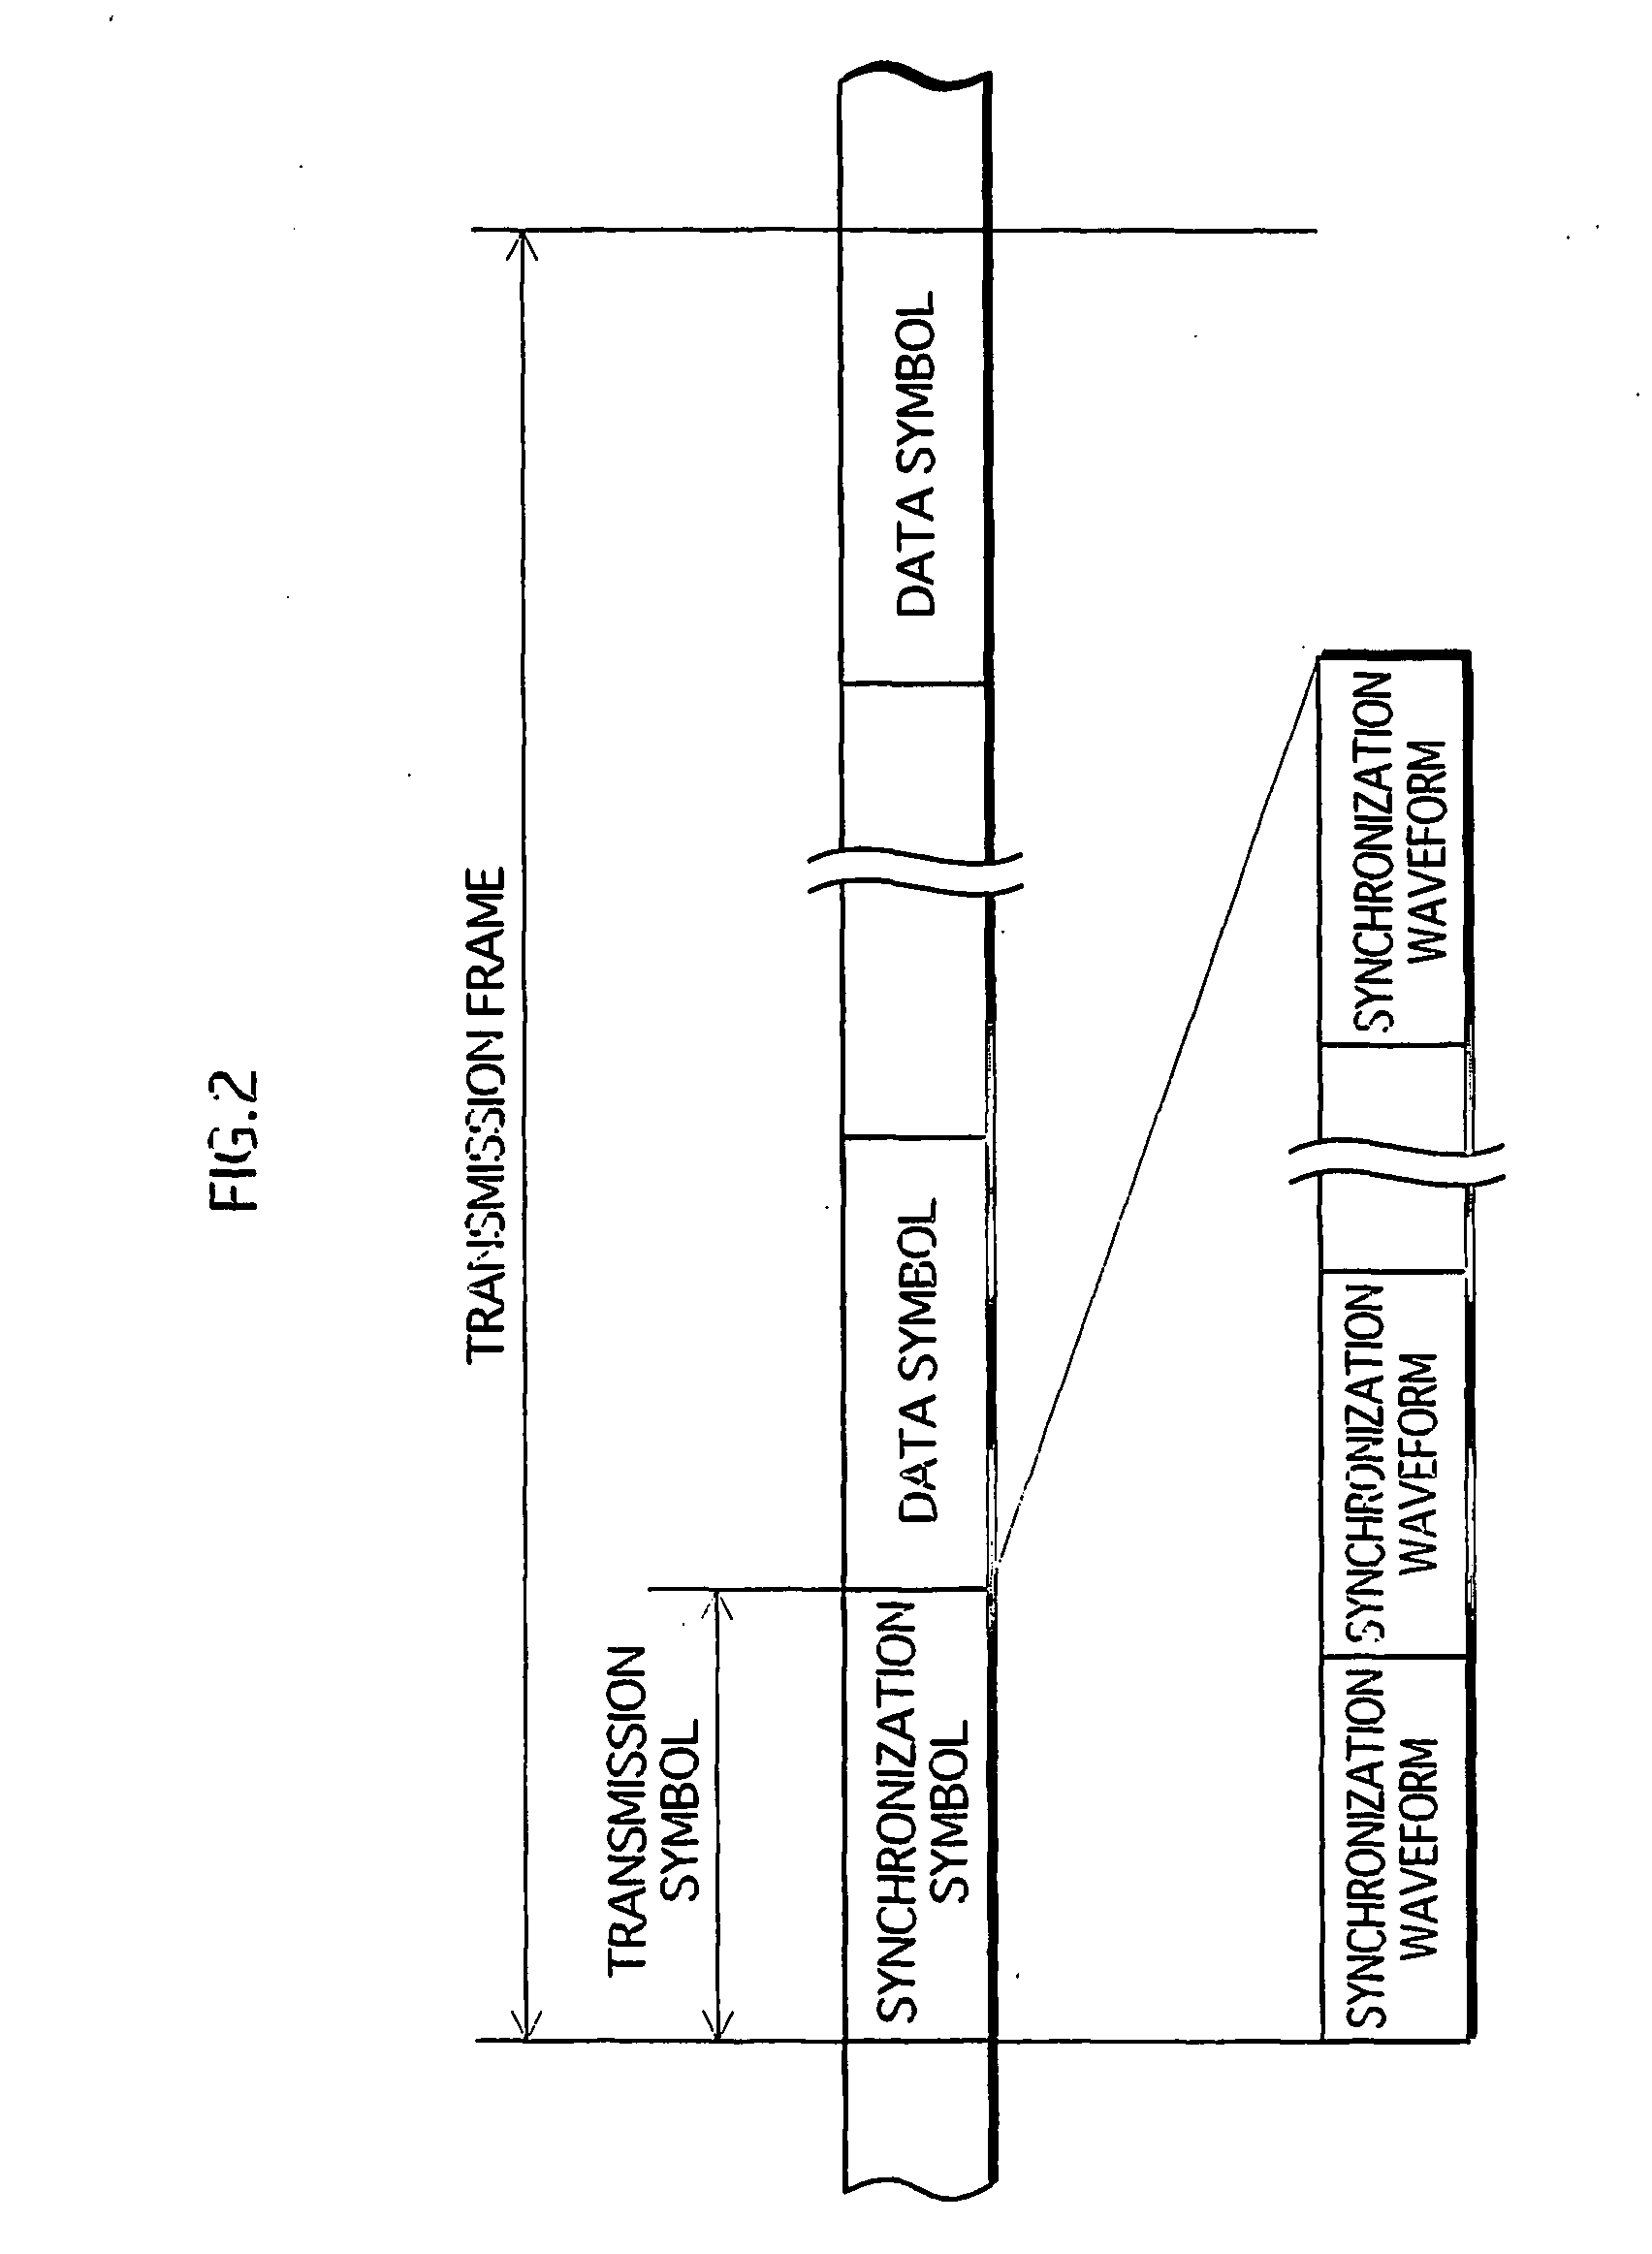 Frequency synchronization apparatus and frequency synchronization method